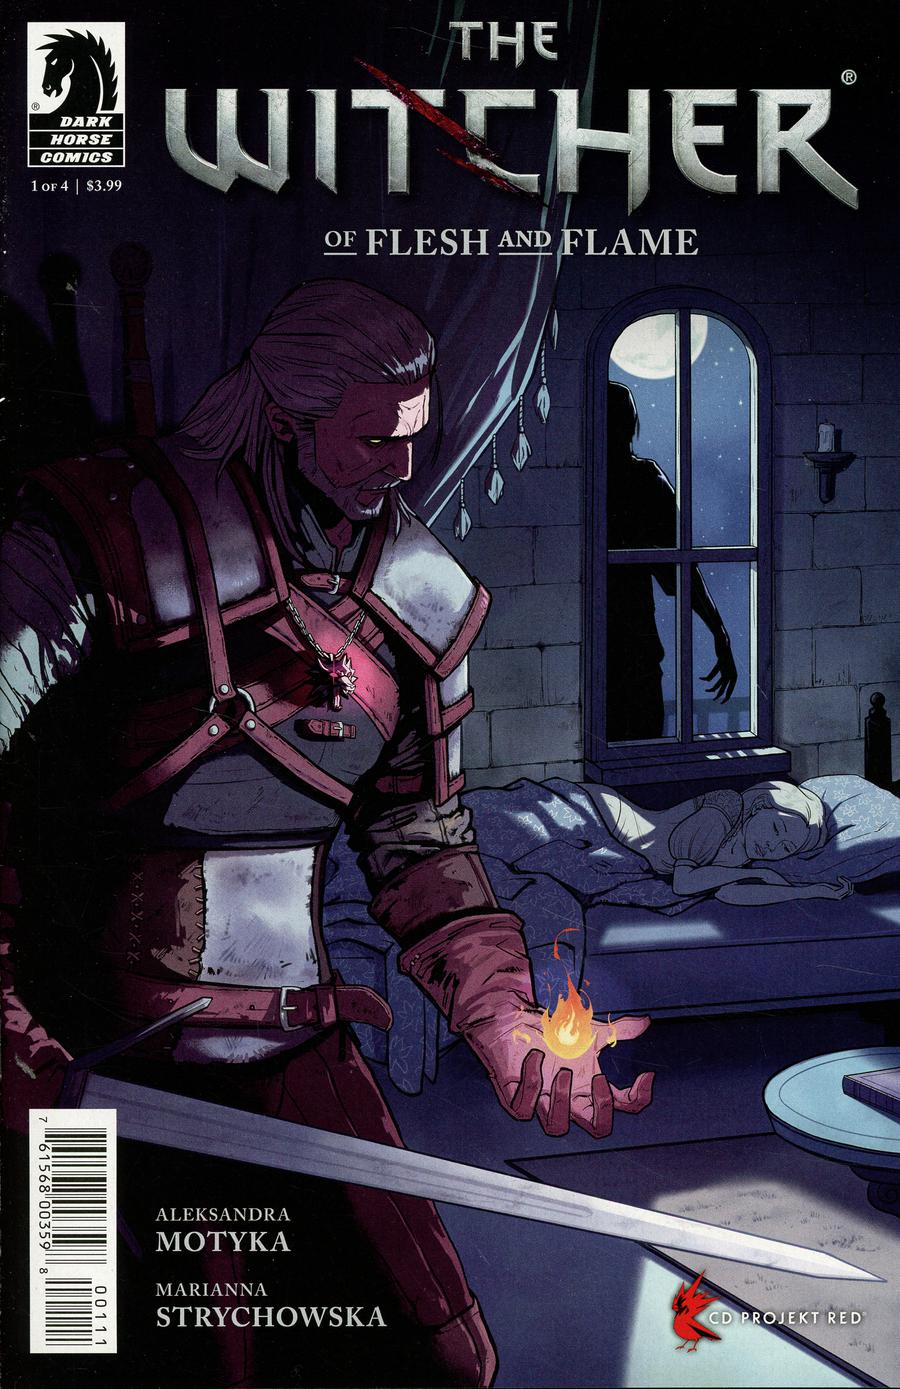 Witcher Of Flesh And Flame #1